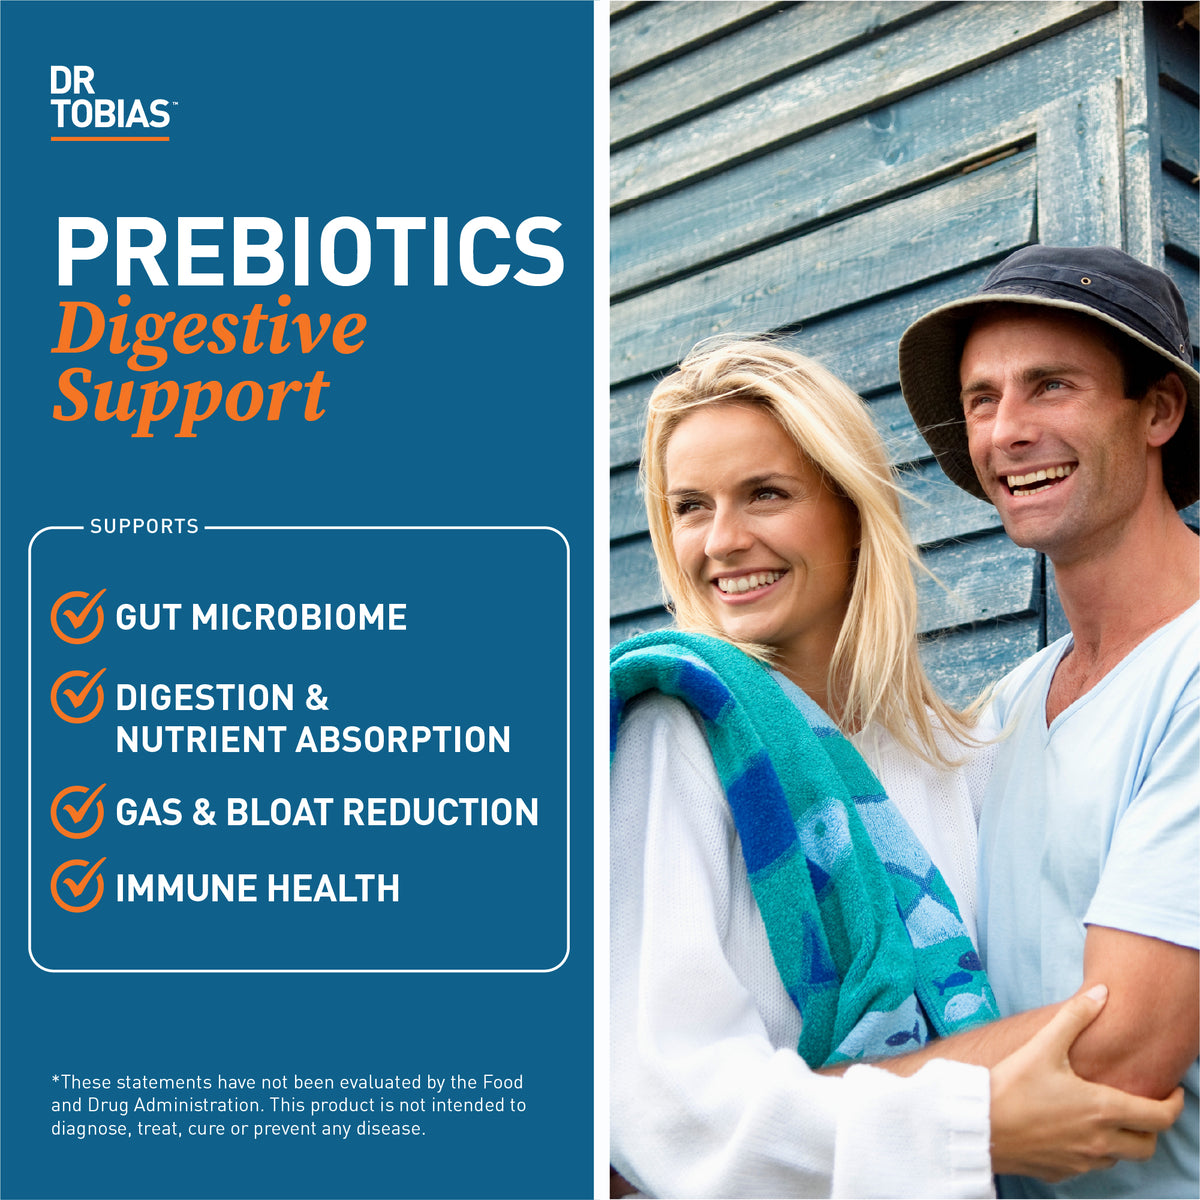 prebiotics digestive supports gut microbiome, digestion and nutrient absorption, gas & gloat reduction, and immune health